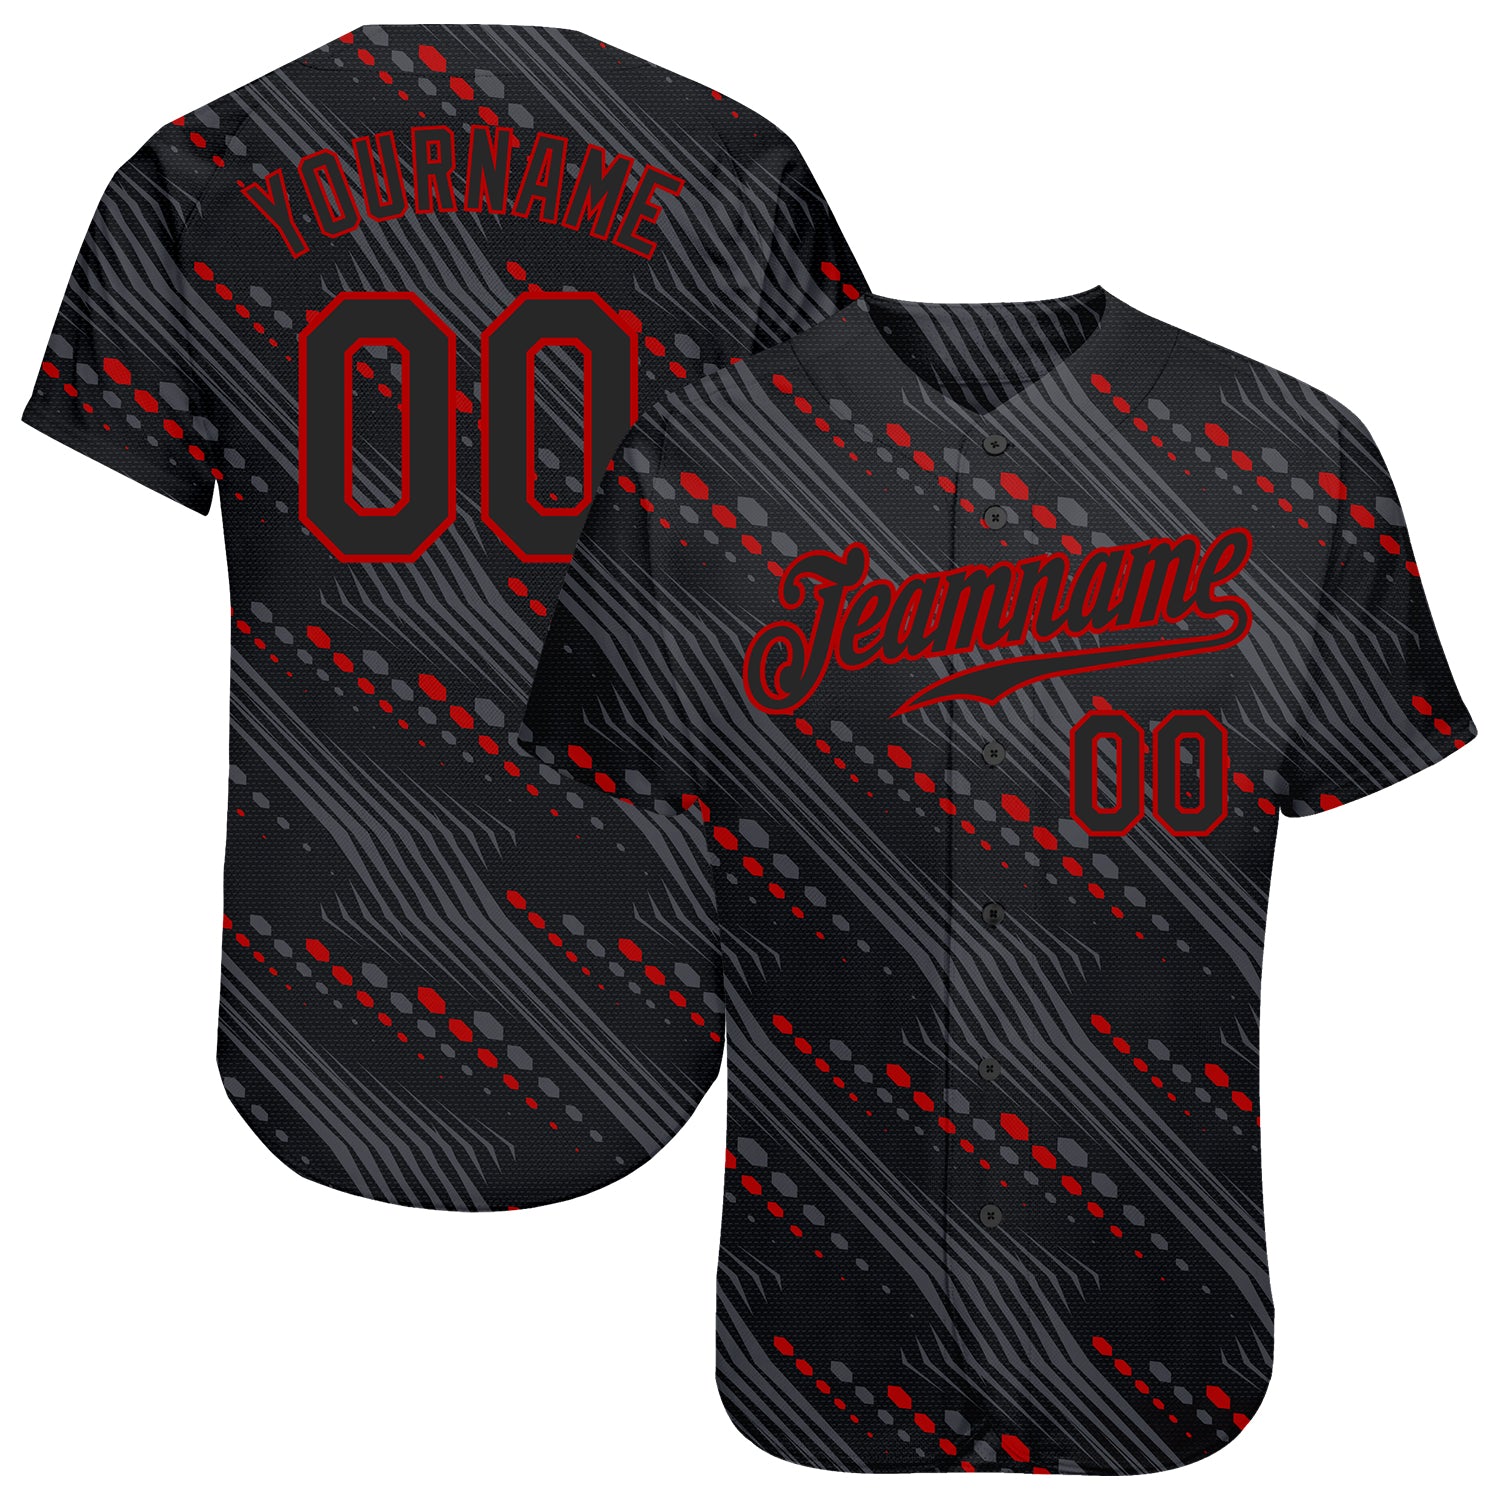 Custom Baseball Jersey Black Black-Red 3D Pattern Design Authentic Youth Size:M